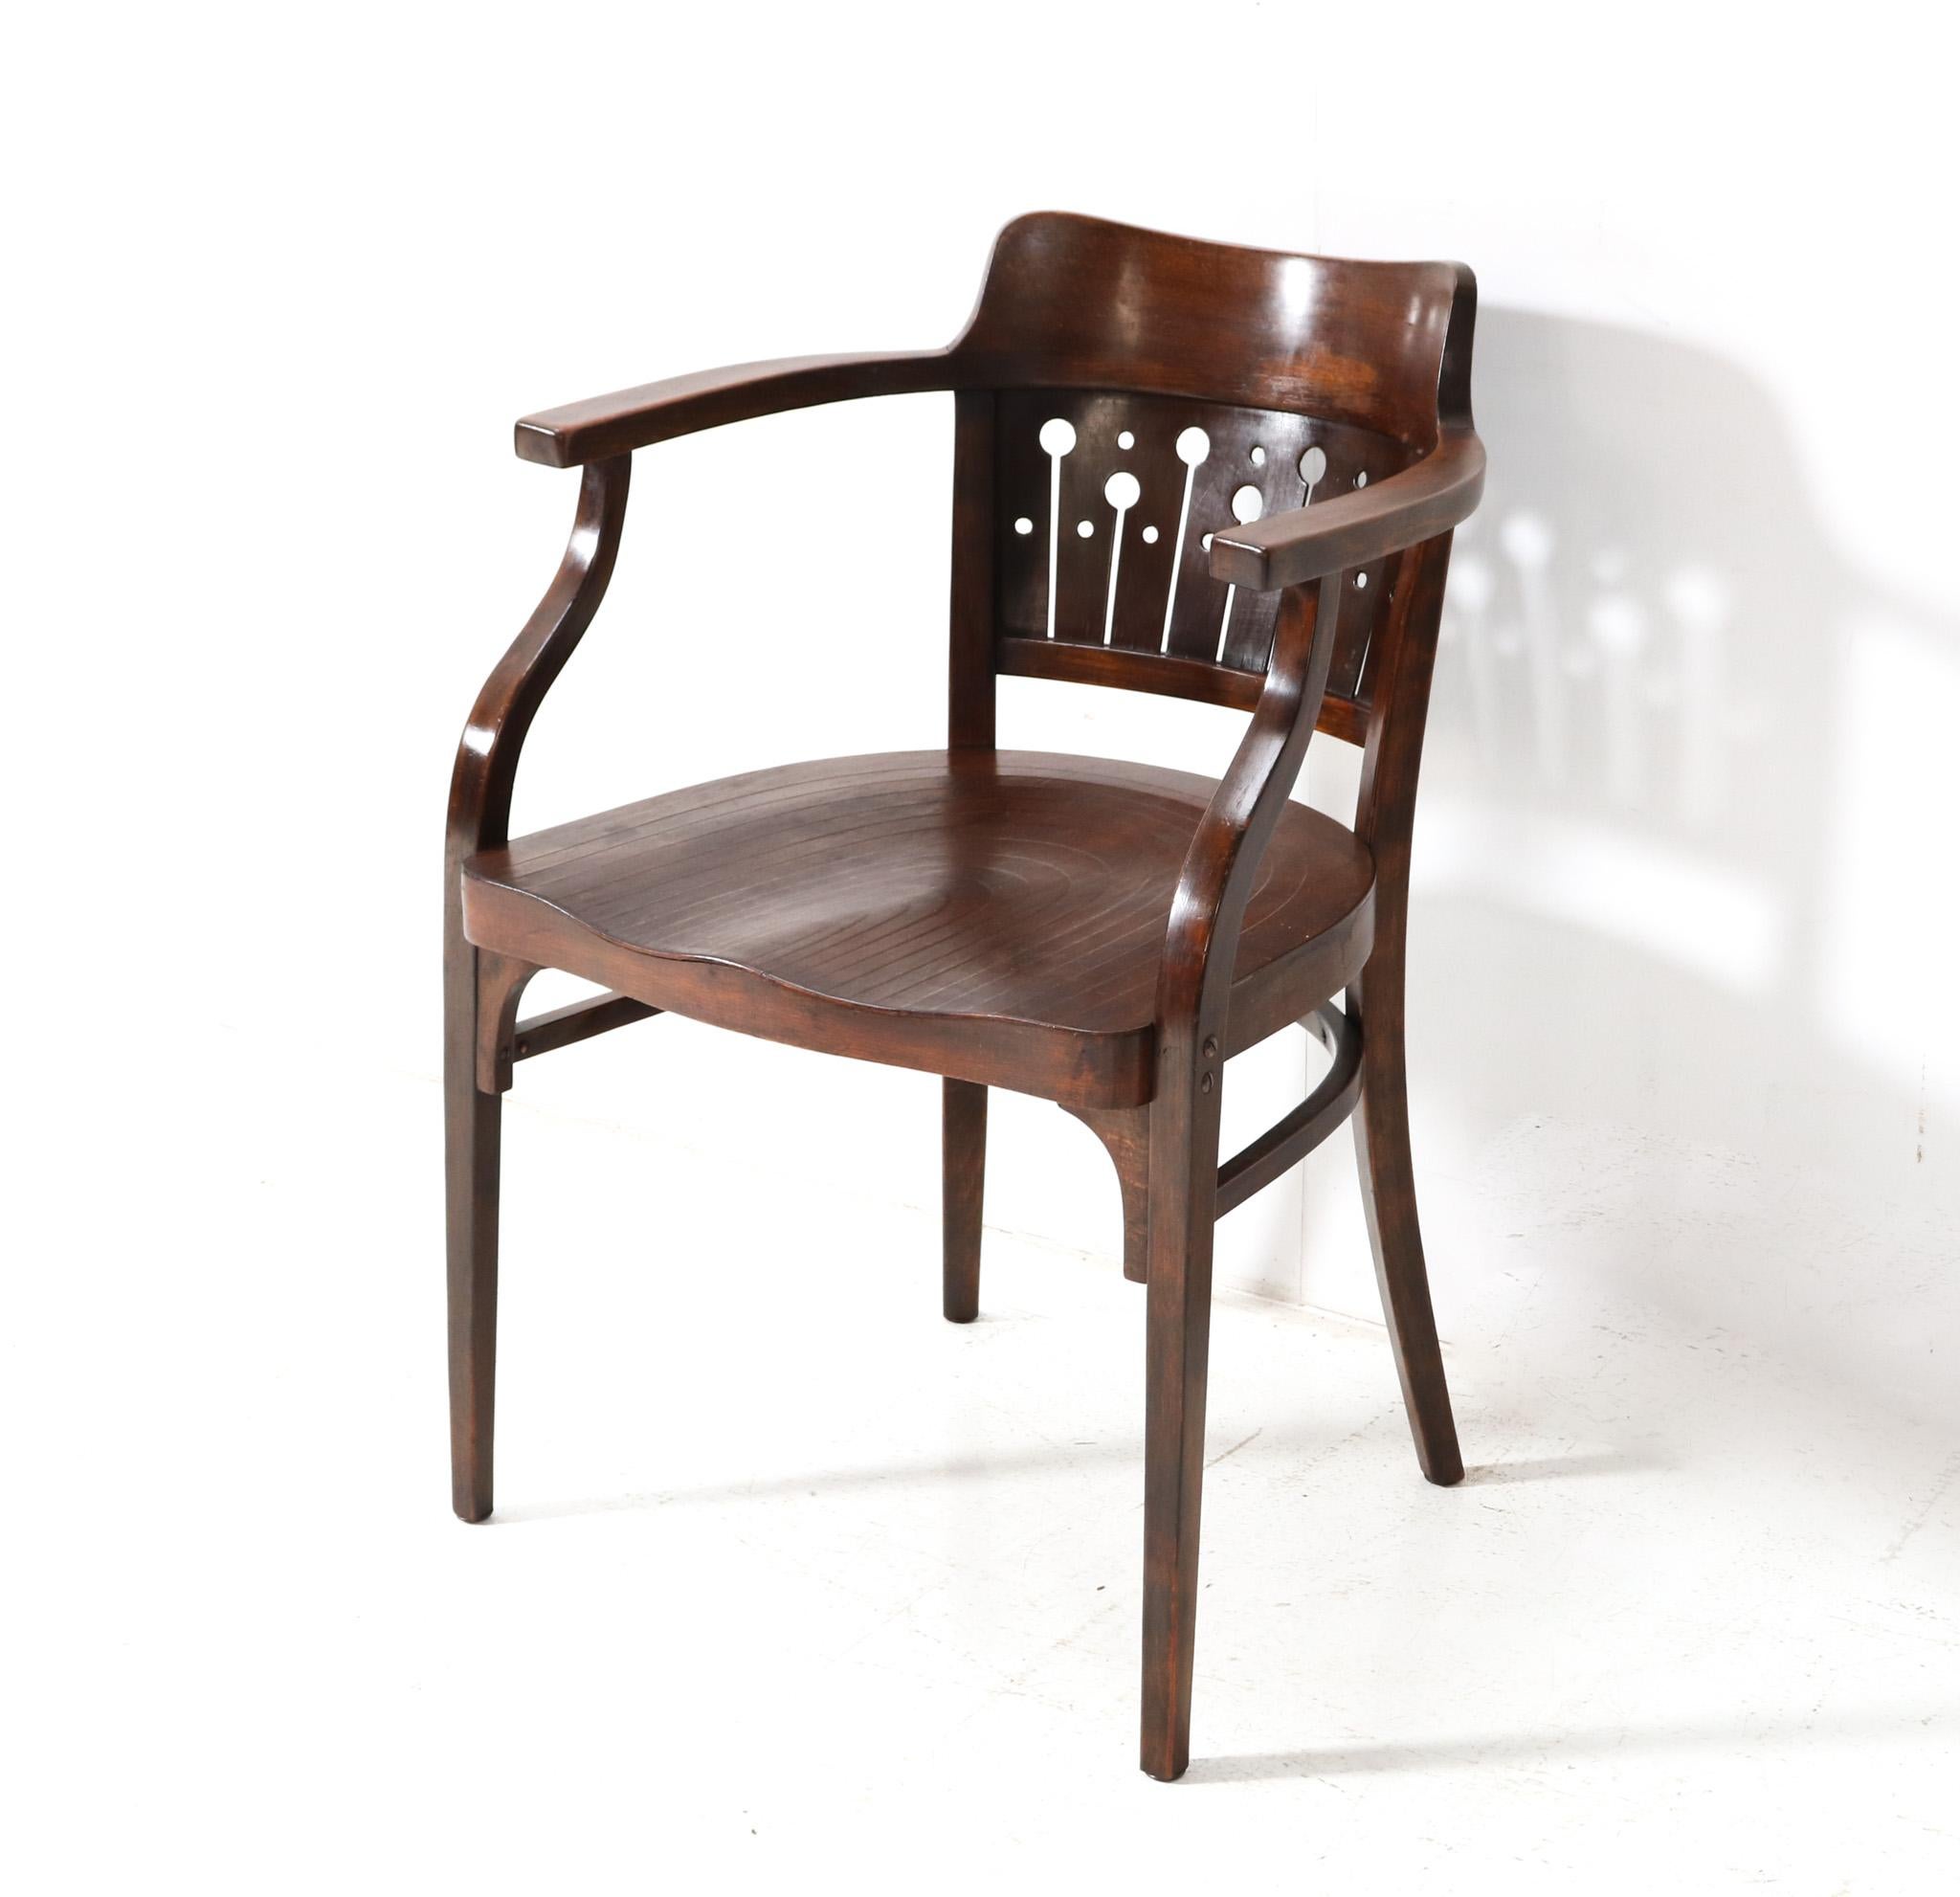 Magnificent and rare Vienna Secession Model 142 armchair.
Design by Otto Wagner for Gebrüder Thonet Vienna.
Striking Austrian design from the 1900s.
Original stained beech bentwood frame with original stained beech seat.
Marked with original